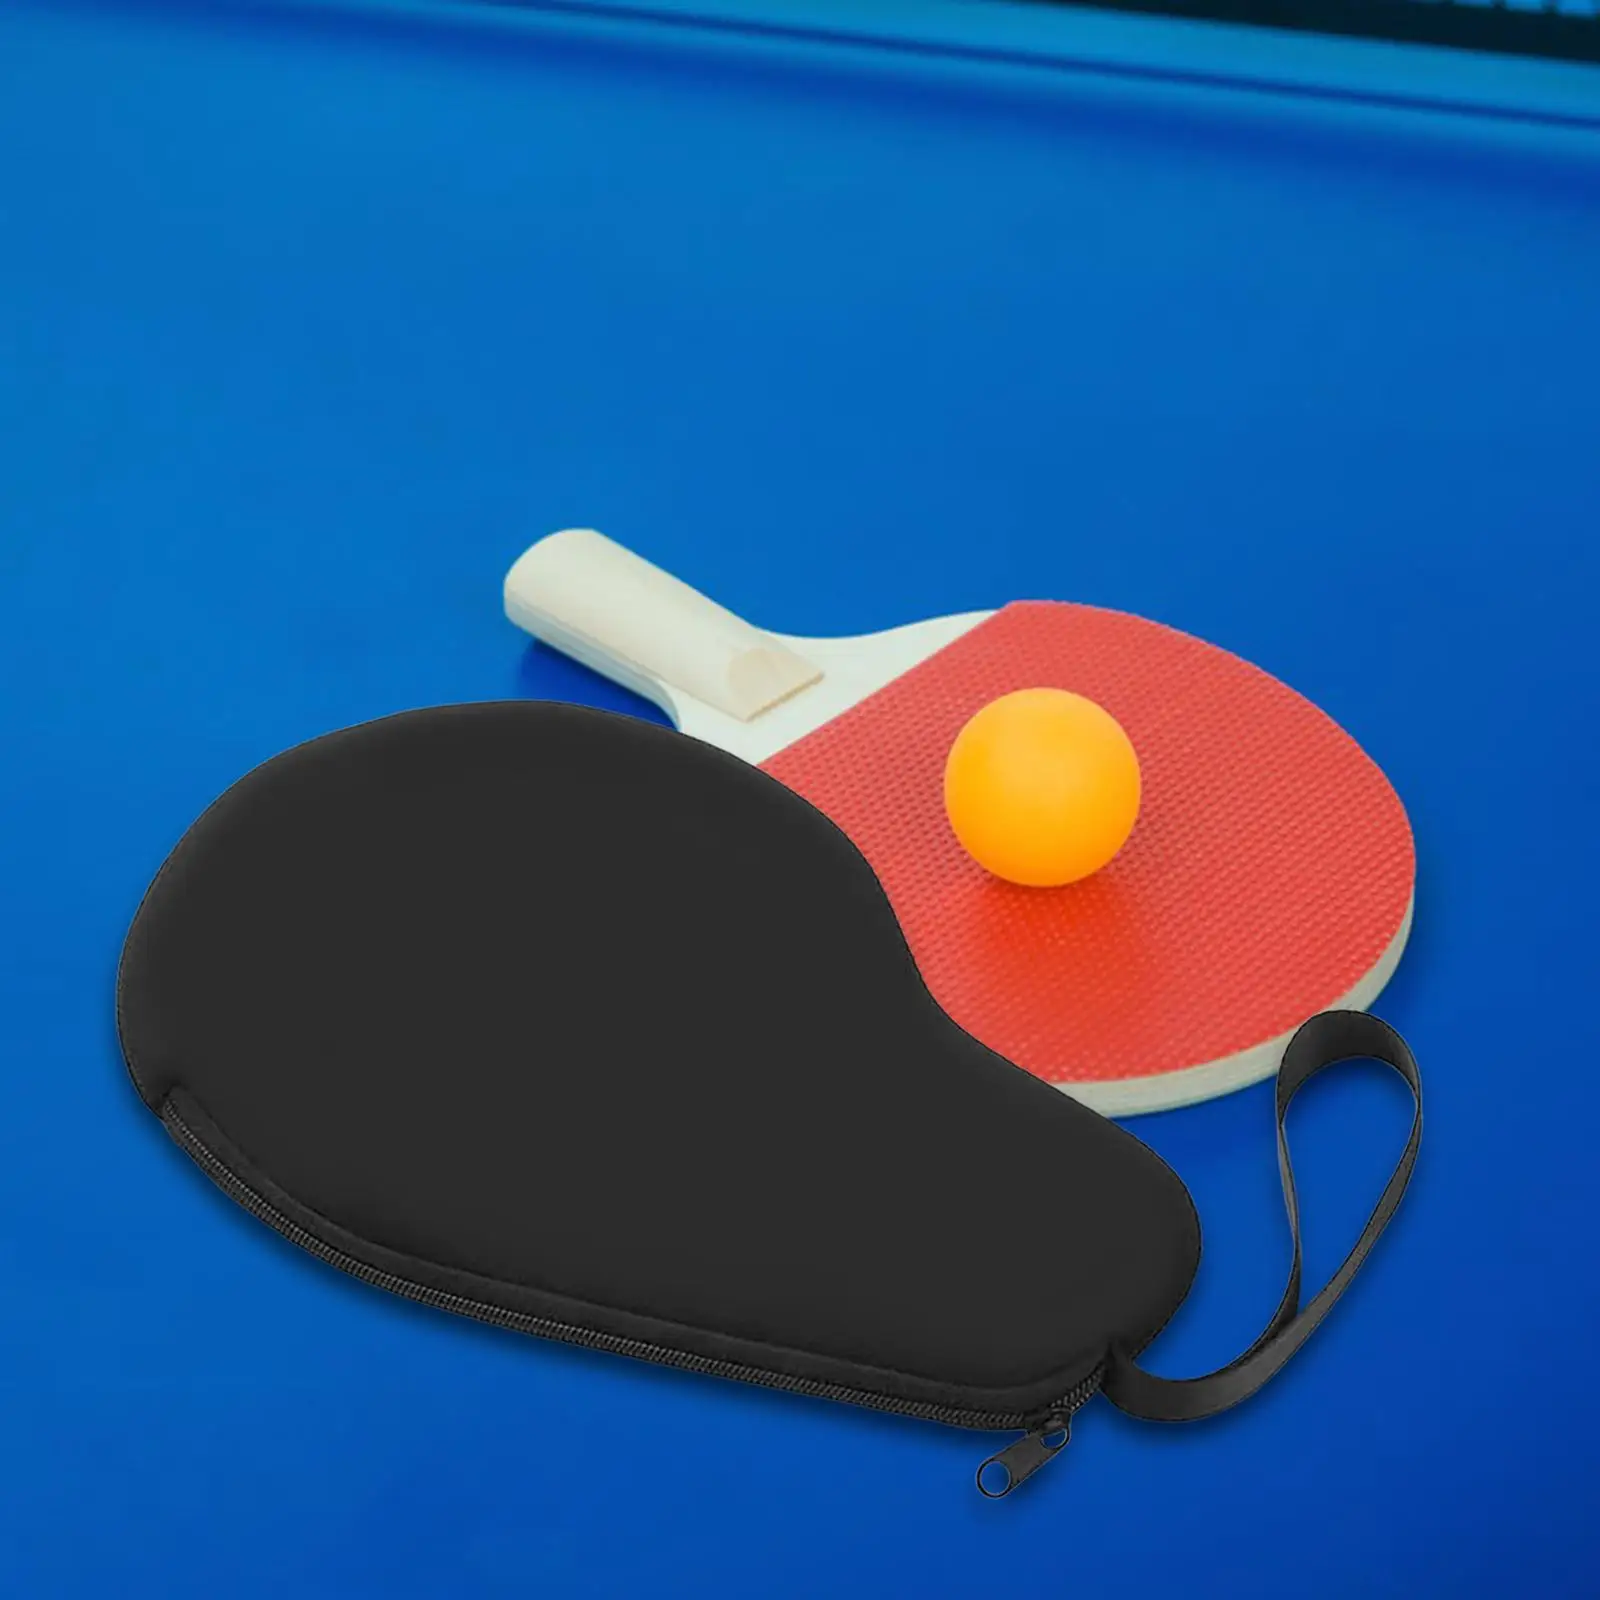 Ping Pong Paddle Case Wear Resistant Container Ping Pong Paddle Cover Table Tennis Cover for Sportsman Unisex Youth Training Gym